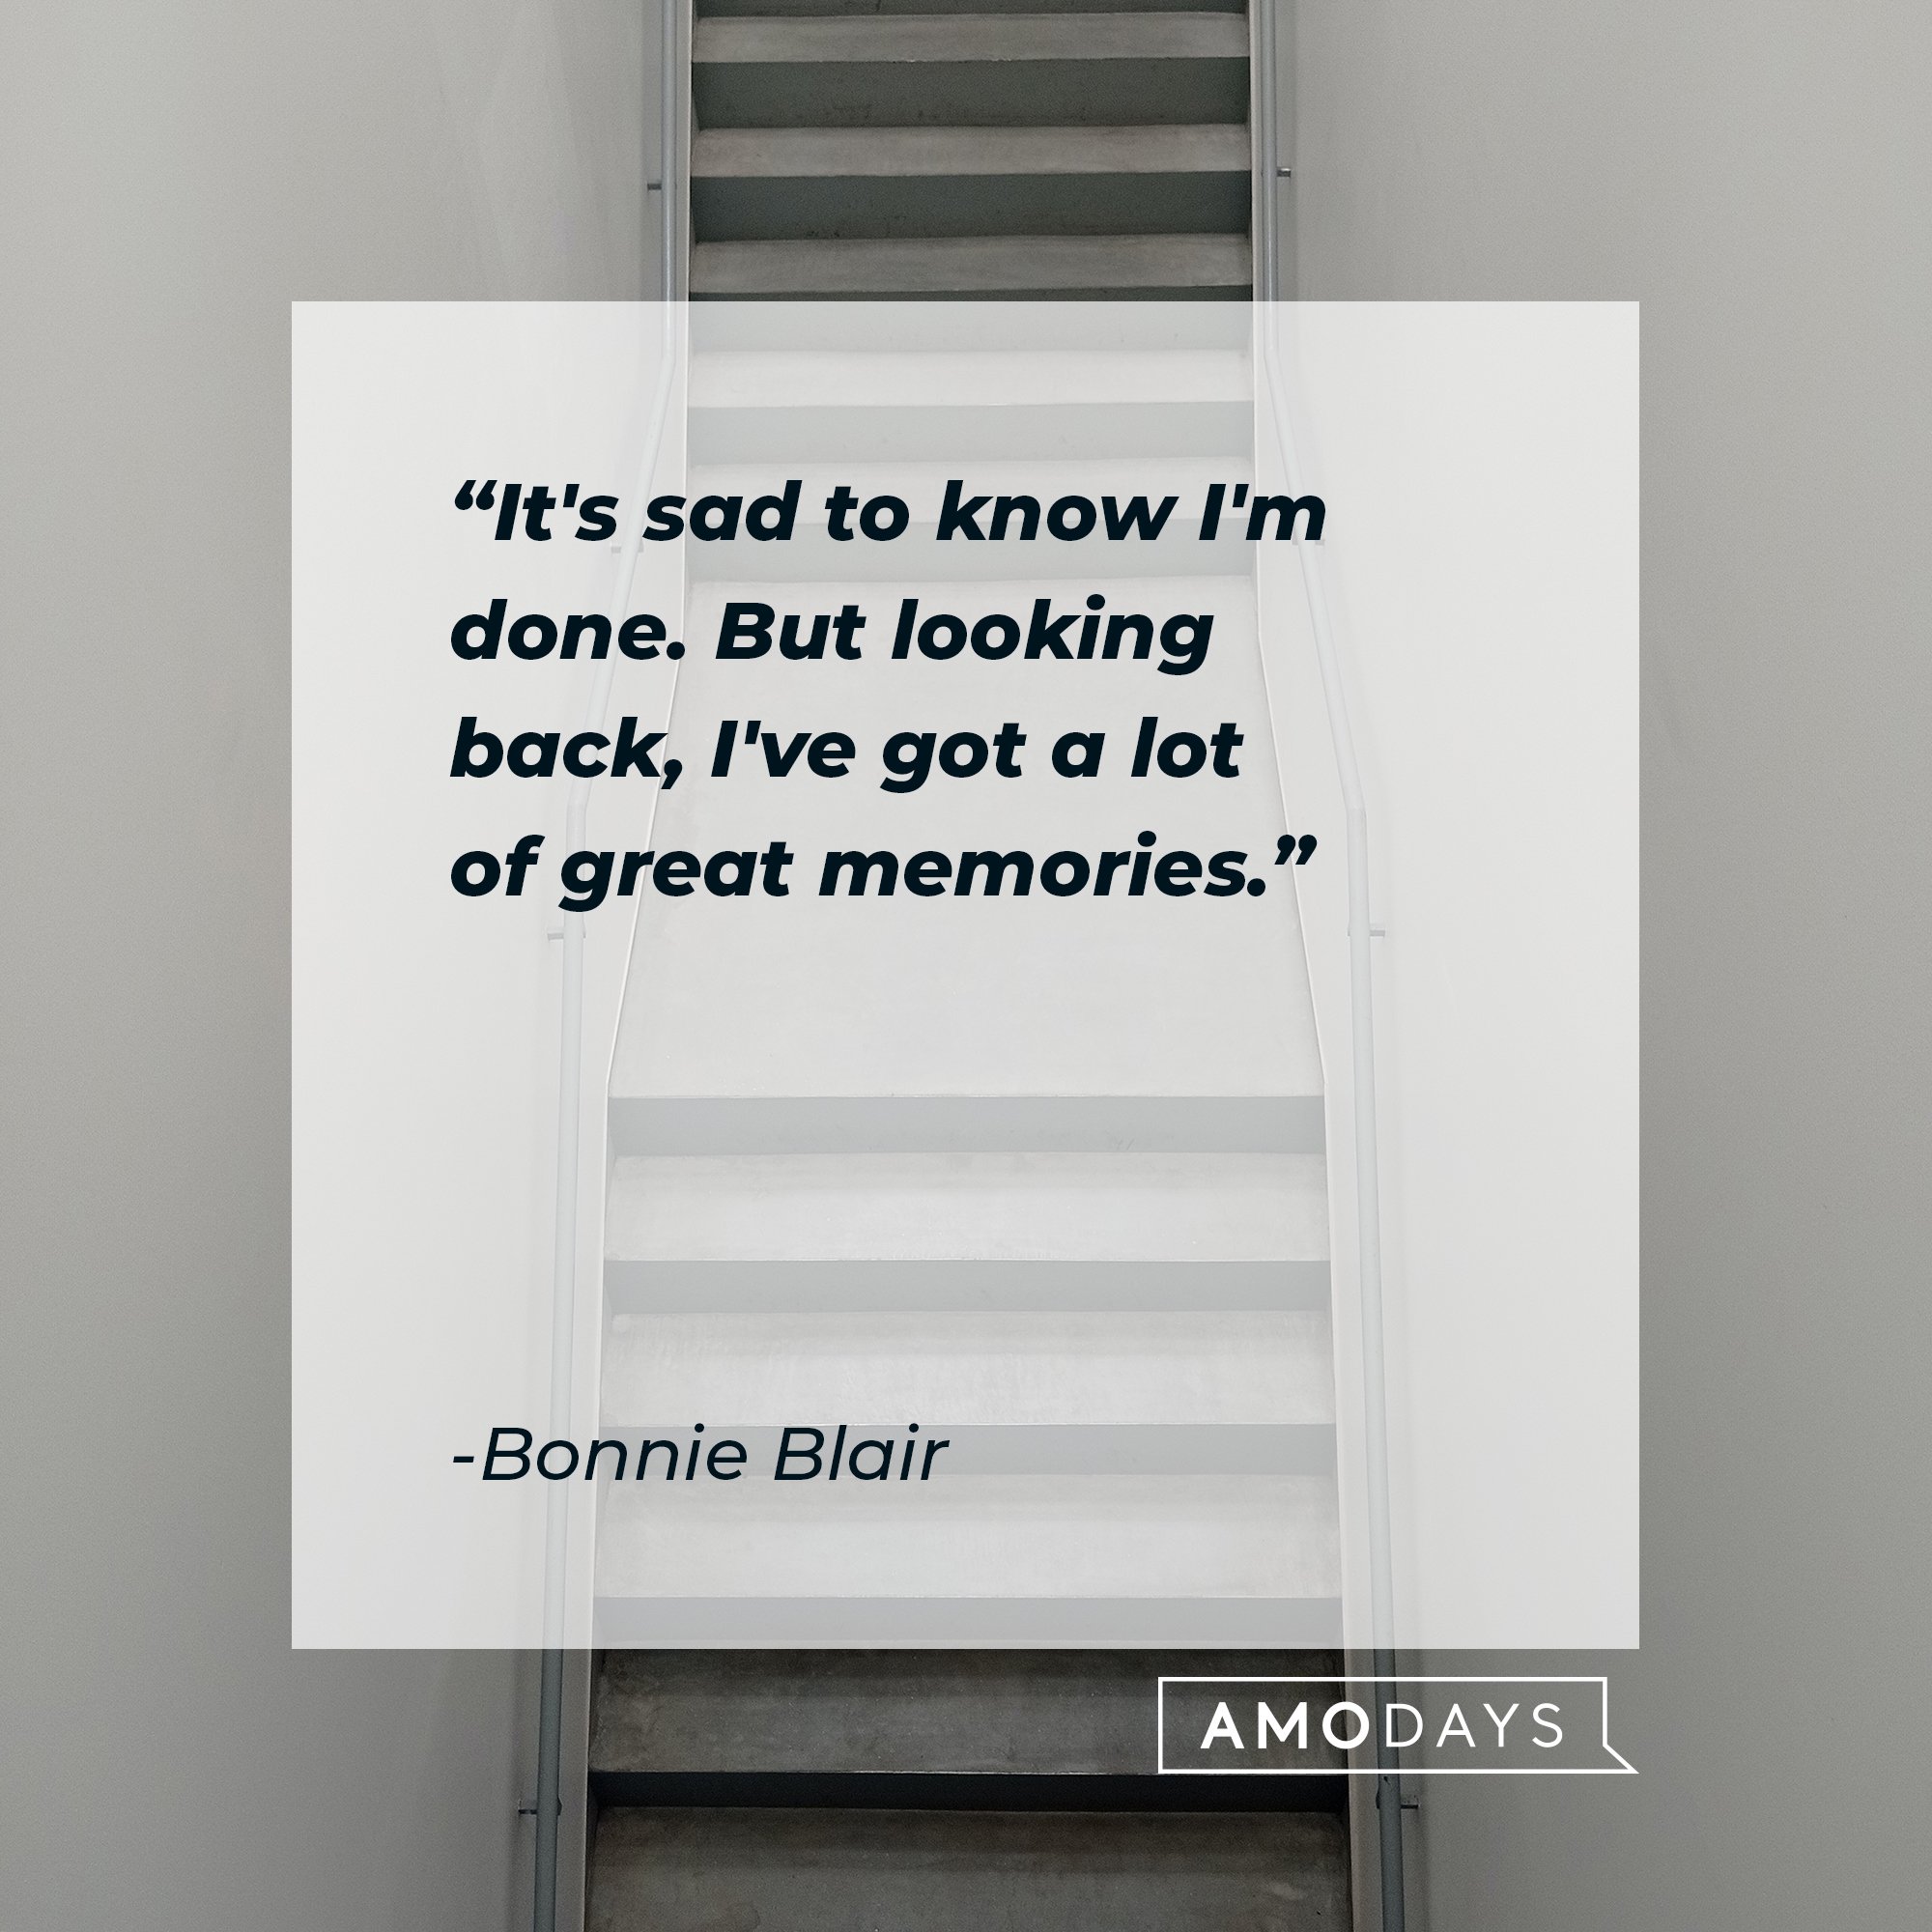 Bonnie Blair’s quote: "It's sad to know I'm done. But looking back, I've got a lot of great memories."  | Image: AmoDays